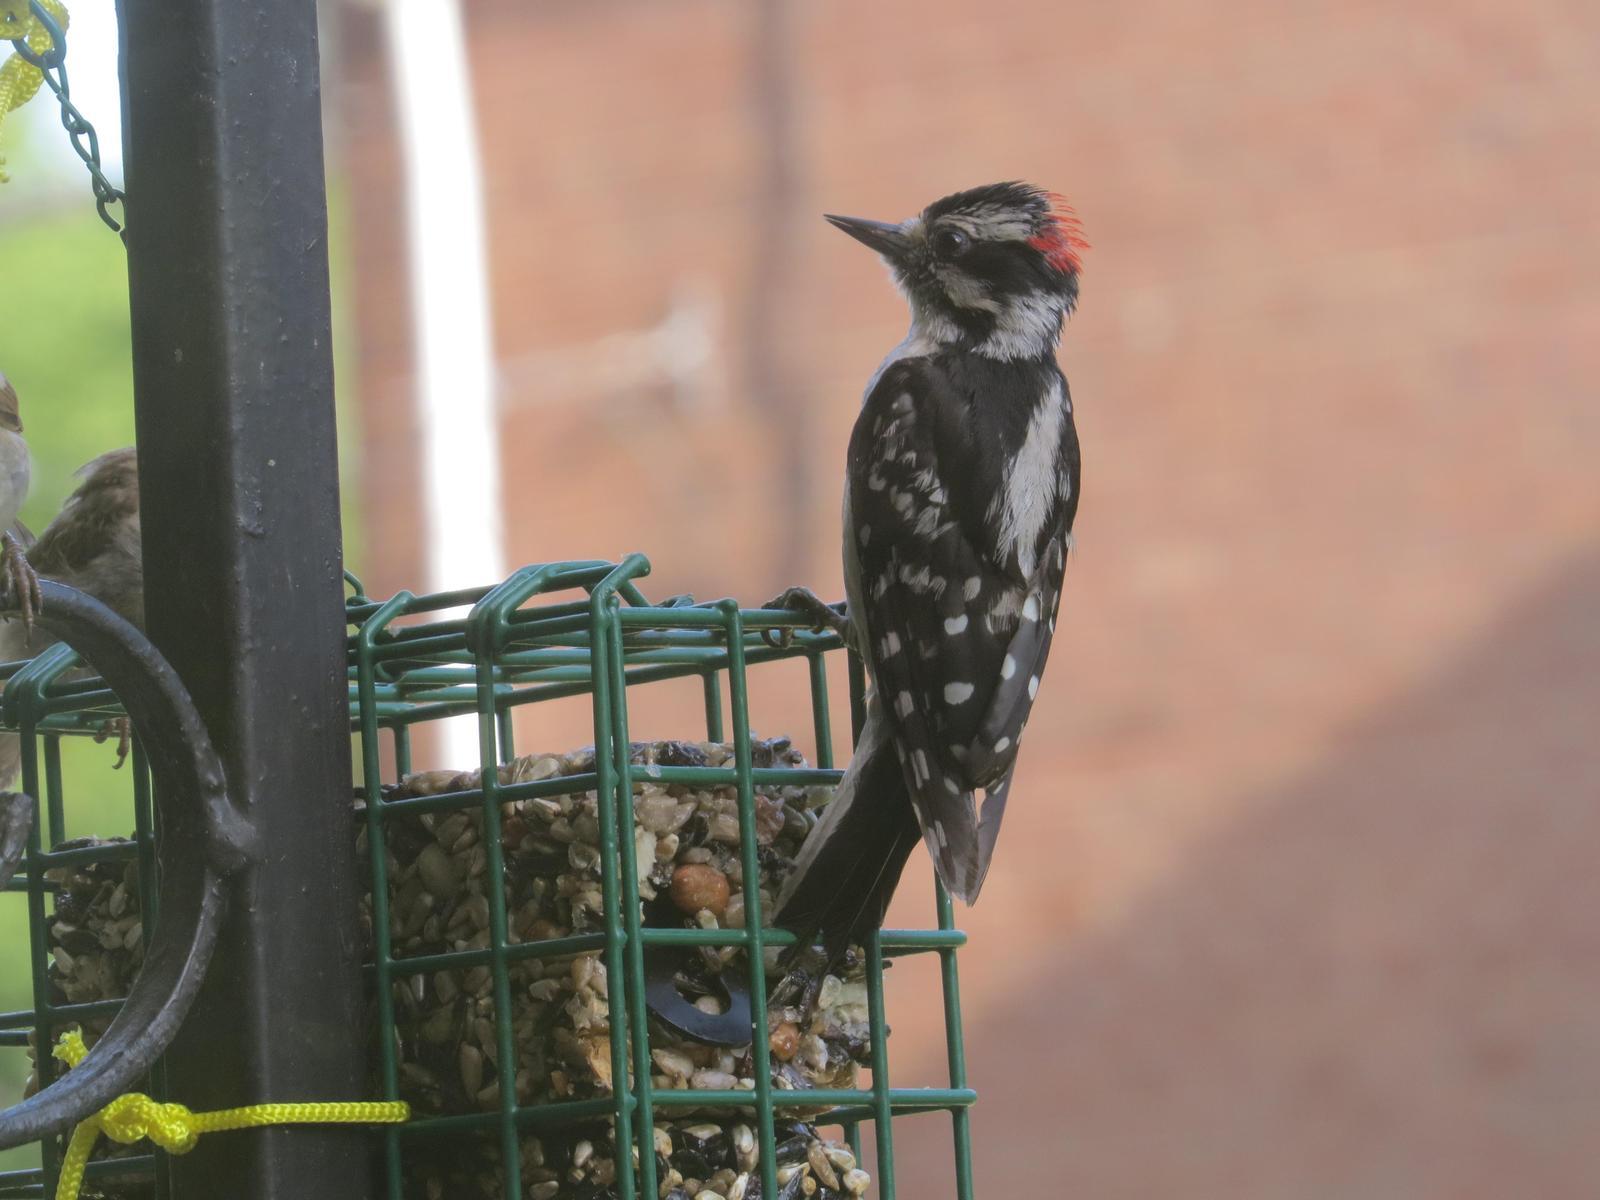 Downy Woodpecker Photo by Kathy Wooding